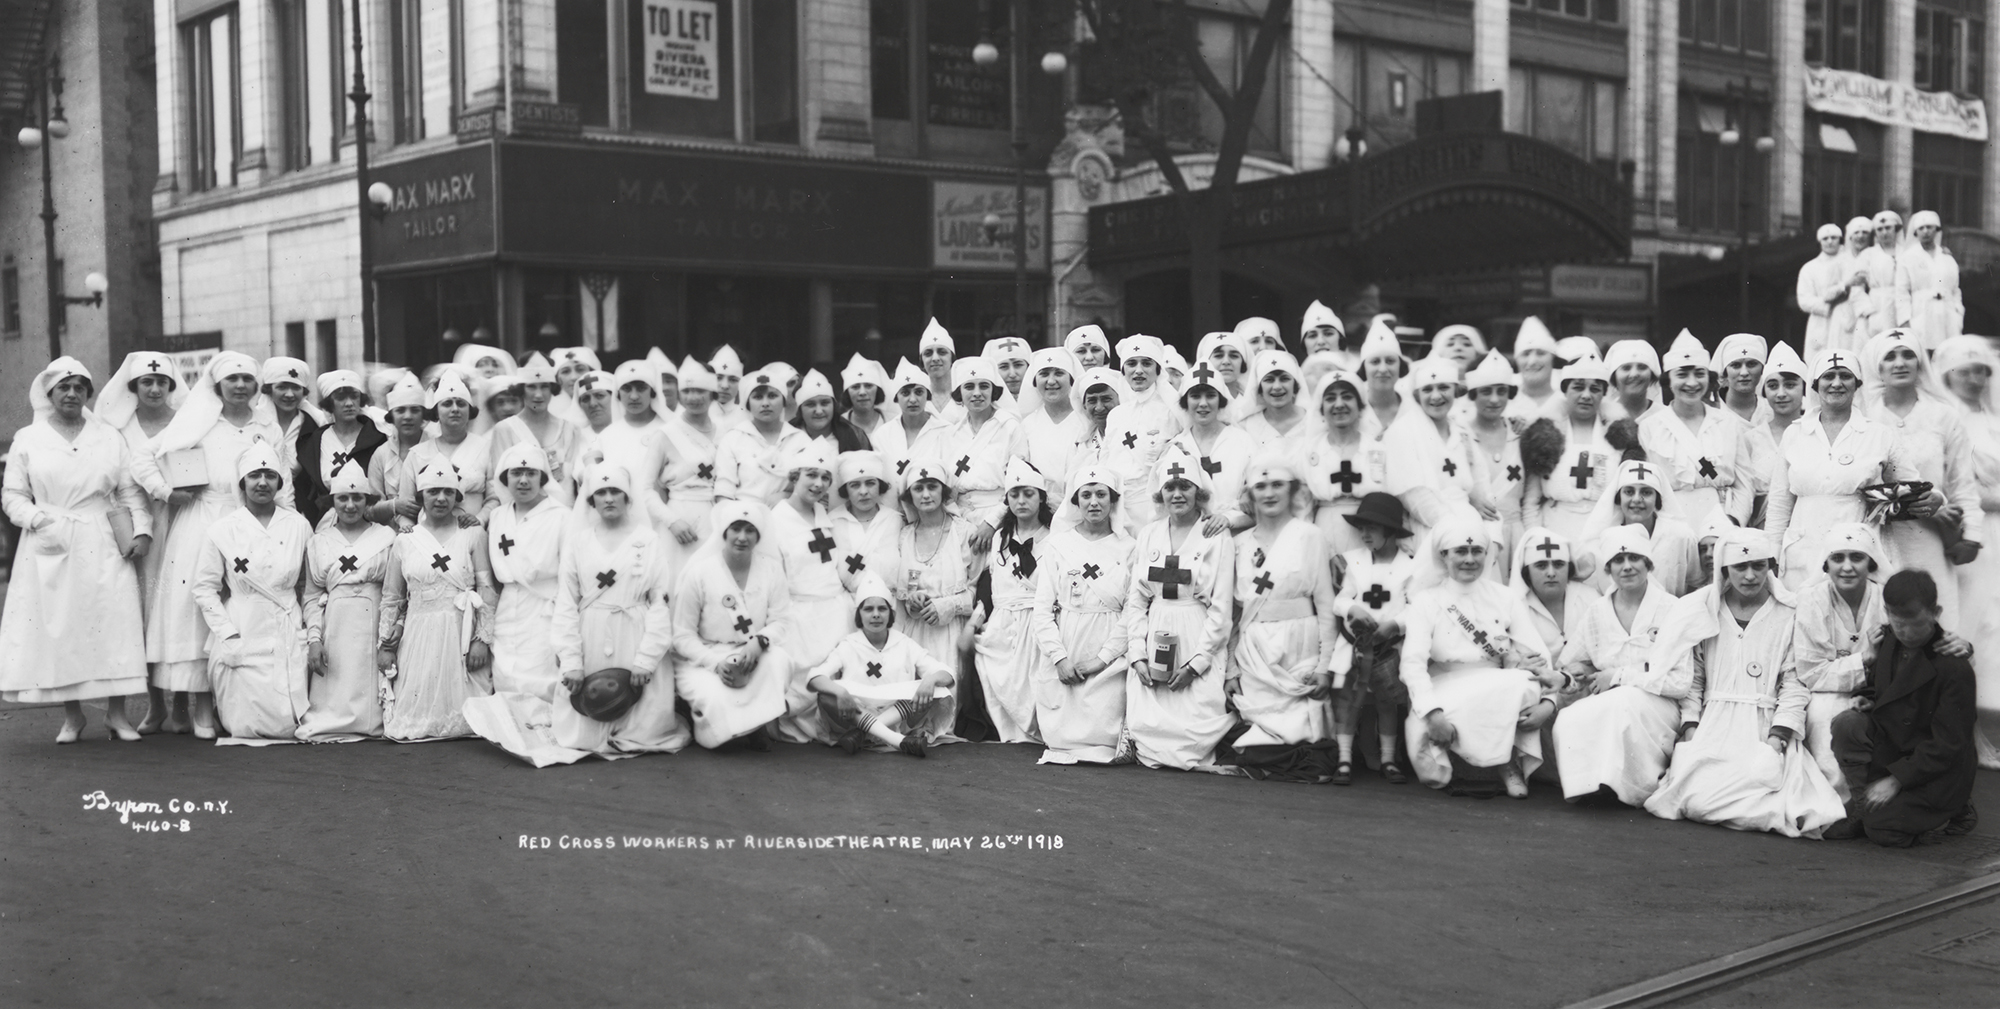 Red Cross Nurses at Riverside Theater in 1918.